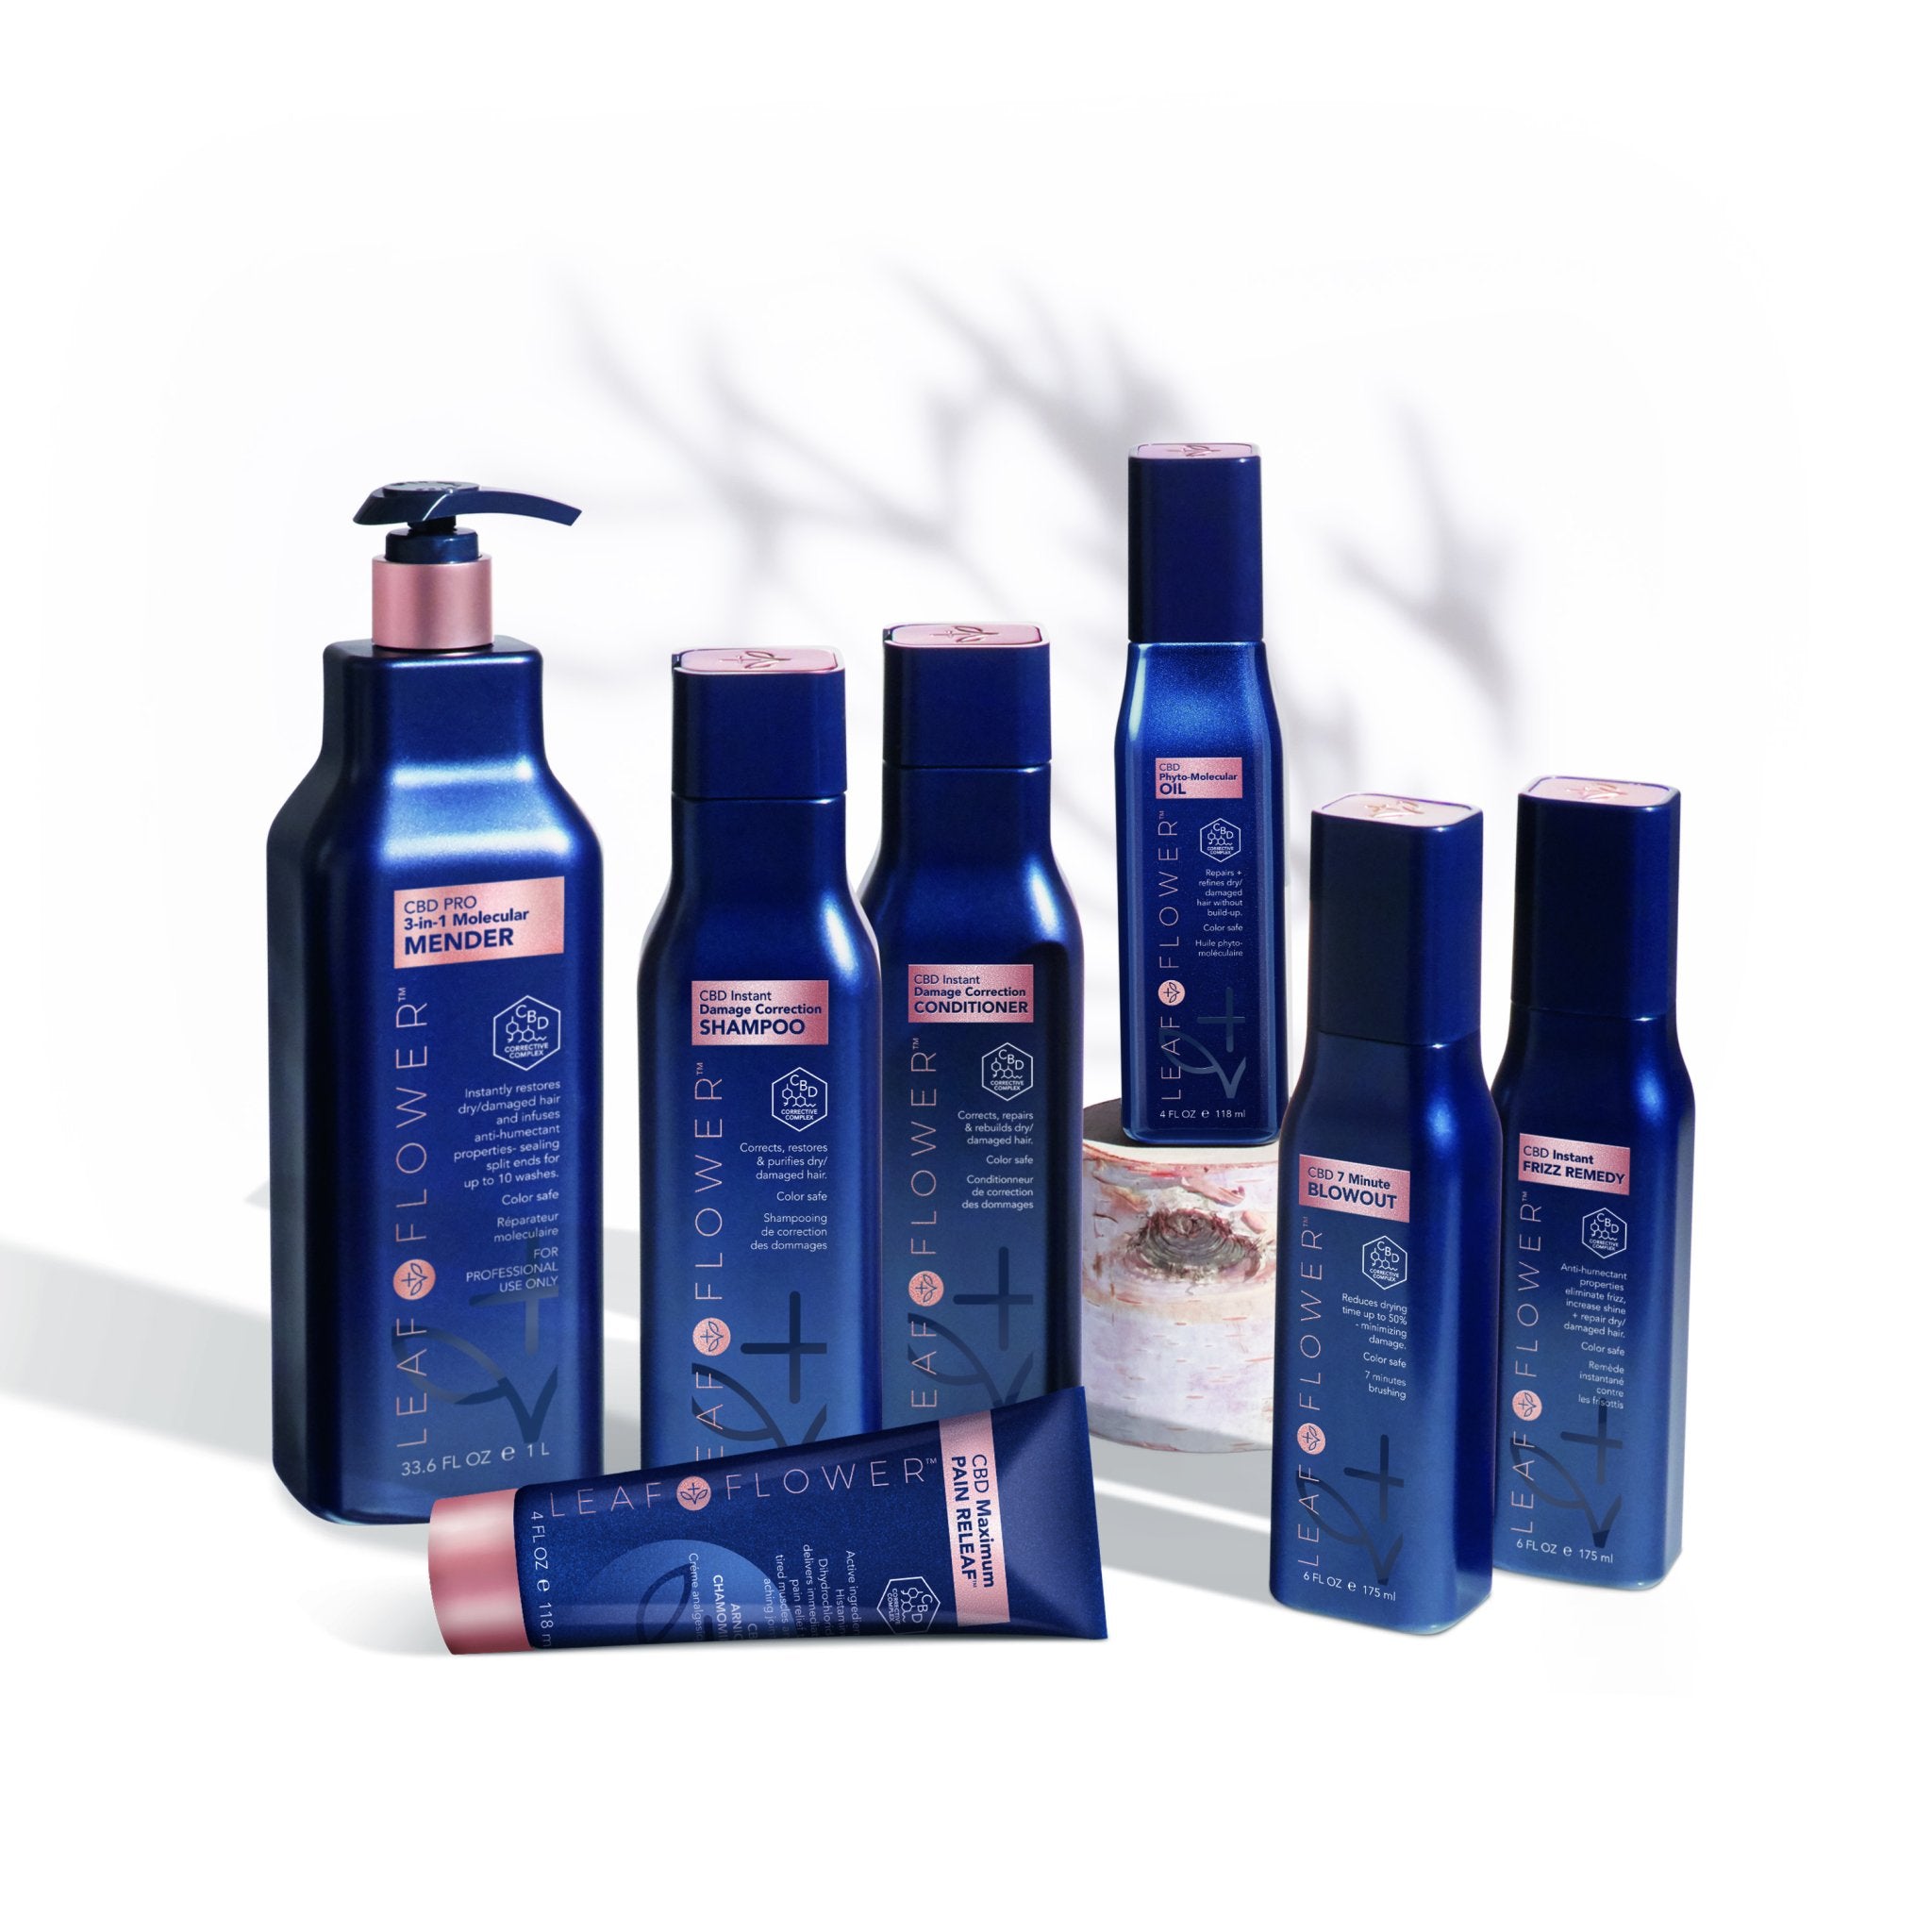 Leaf and Flower Damage Correction collection will reduce frizz, repair hair, and give you faster blowouts. Try it now.